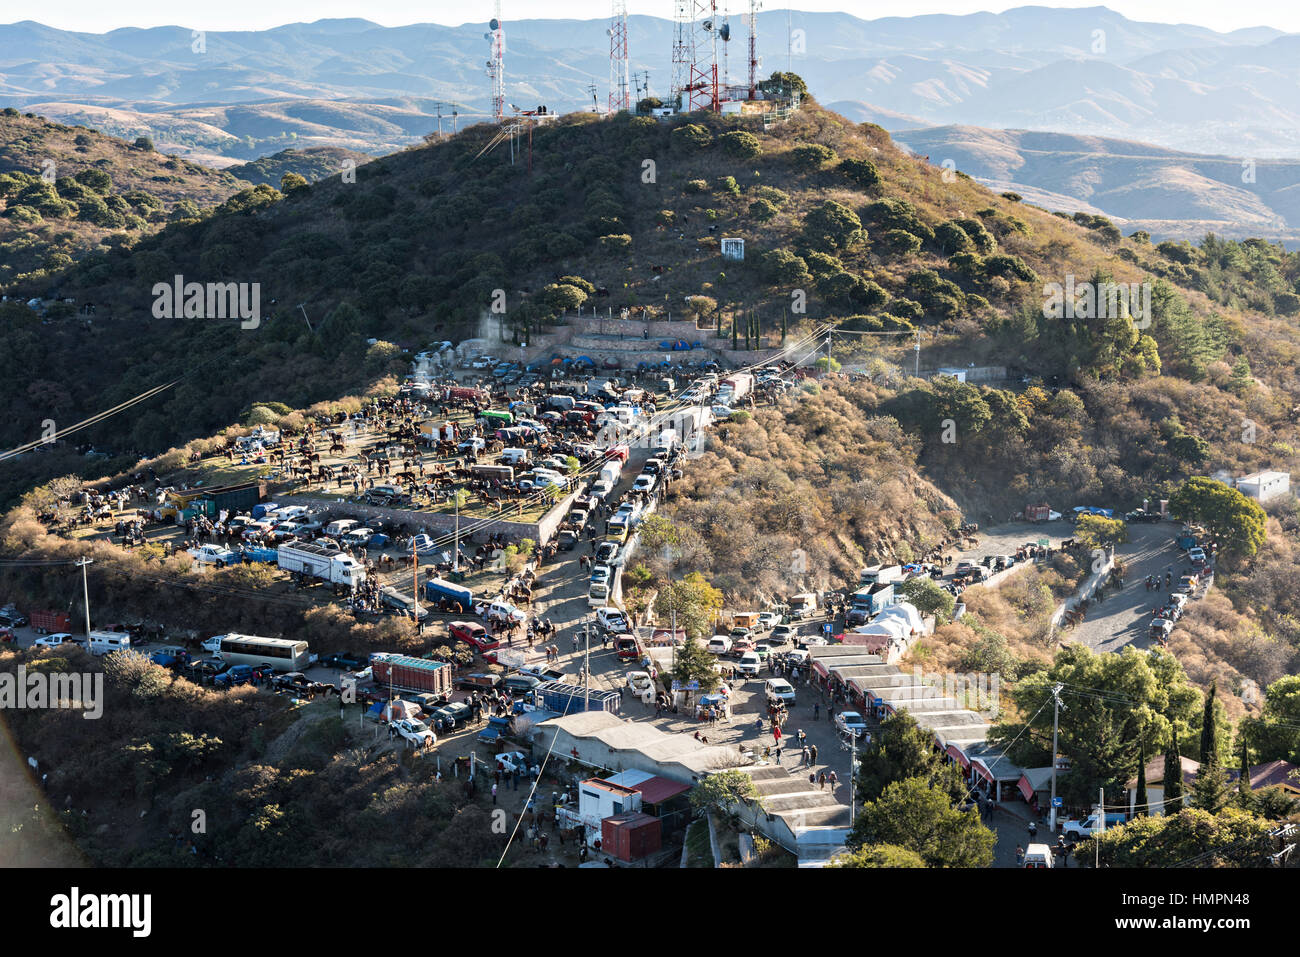 The camp sites of thousands of Mexican cowboys on Cubilete Mountain at the end of the annual Cabalgata de Cristo Rey pilgrimage January 6, 2017 in Guanajuato, Mexico. Thousands of Mexican cowboys take part in the three-day ride to the mountaintop shrine of Cristo Rey. Stock Photo